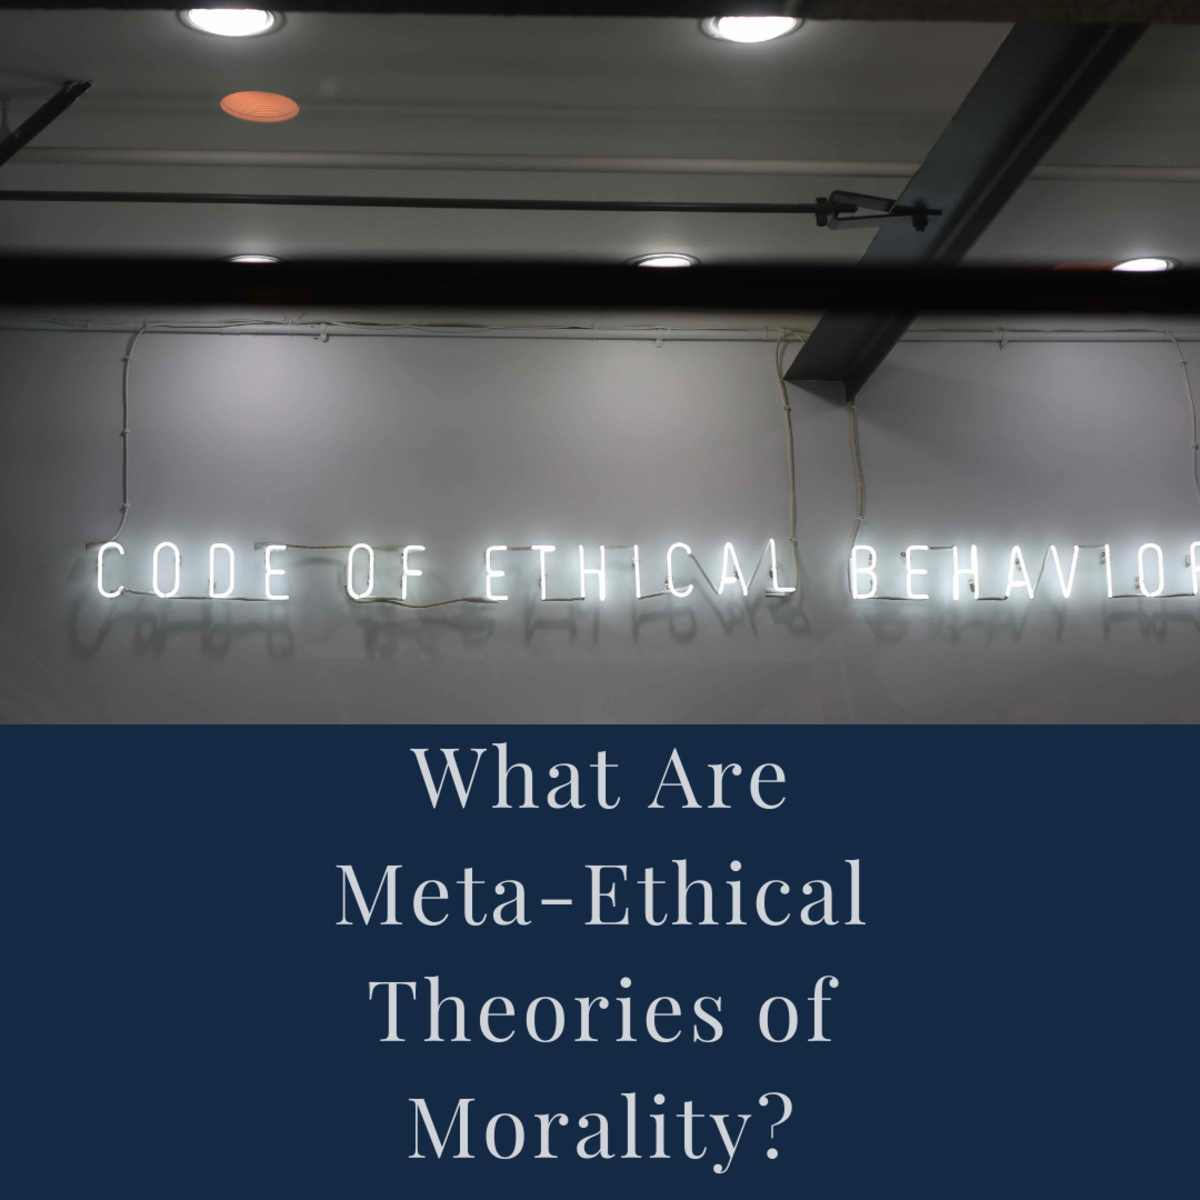 Analyzing Non-Cognitivism and Other Meta-Ethical Theories of Morality